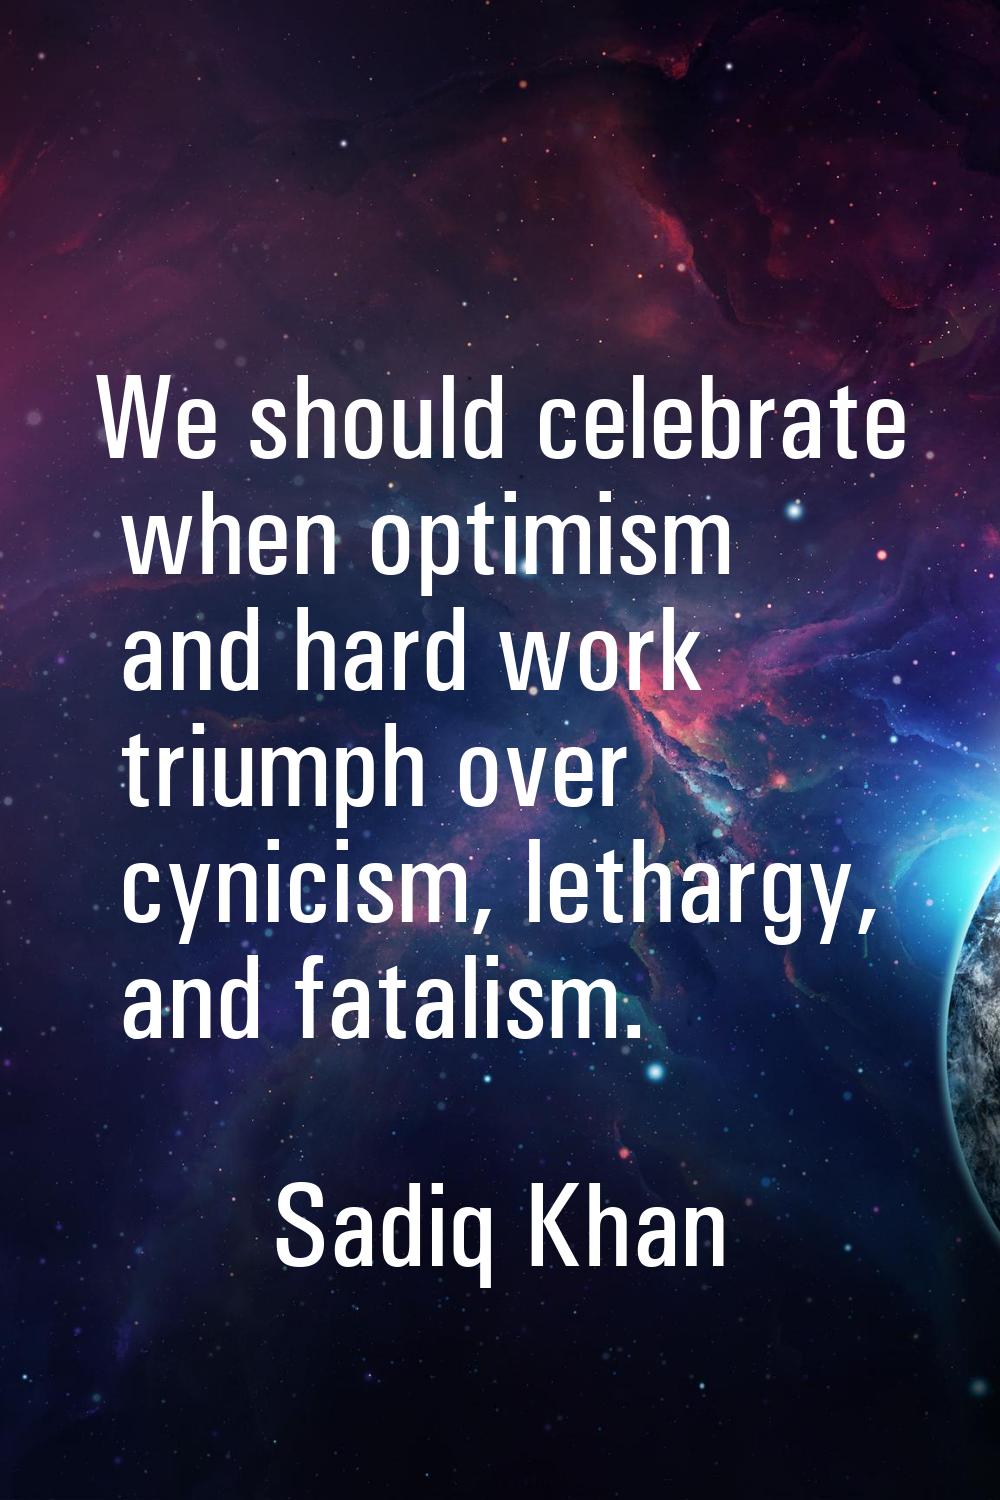 We should celebrate when optimism and hard work triumph over cynicism, lethargy, and fatalism.